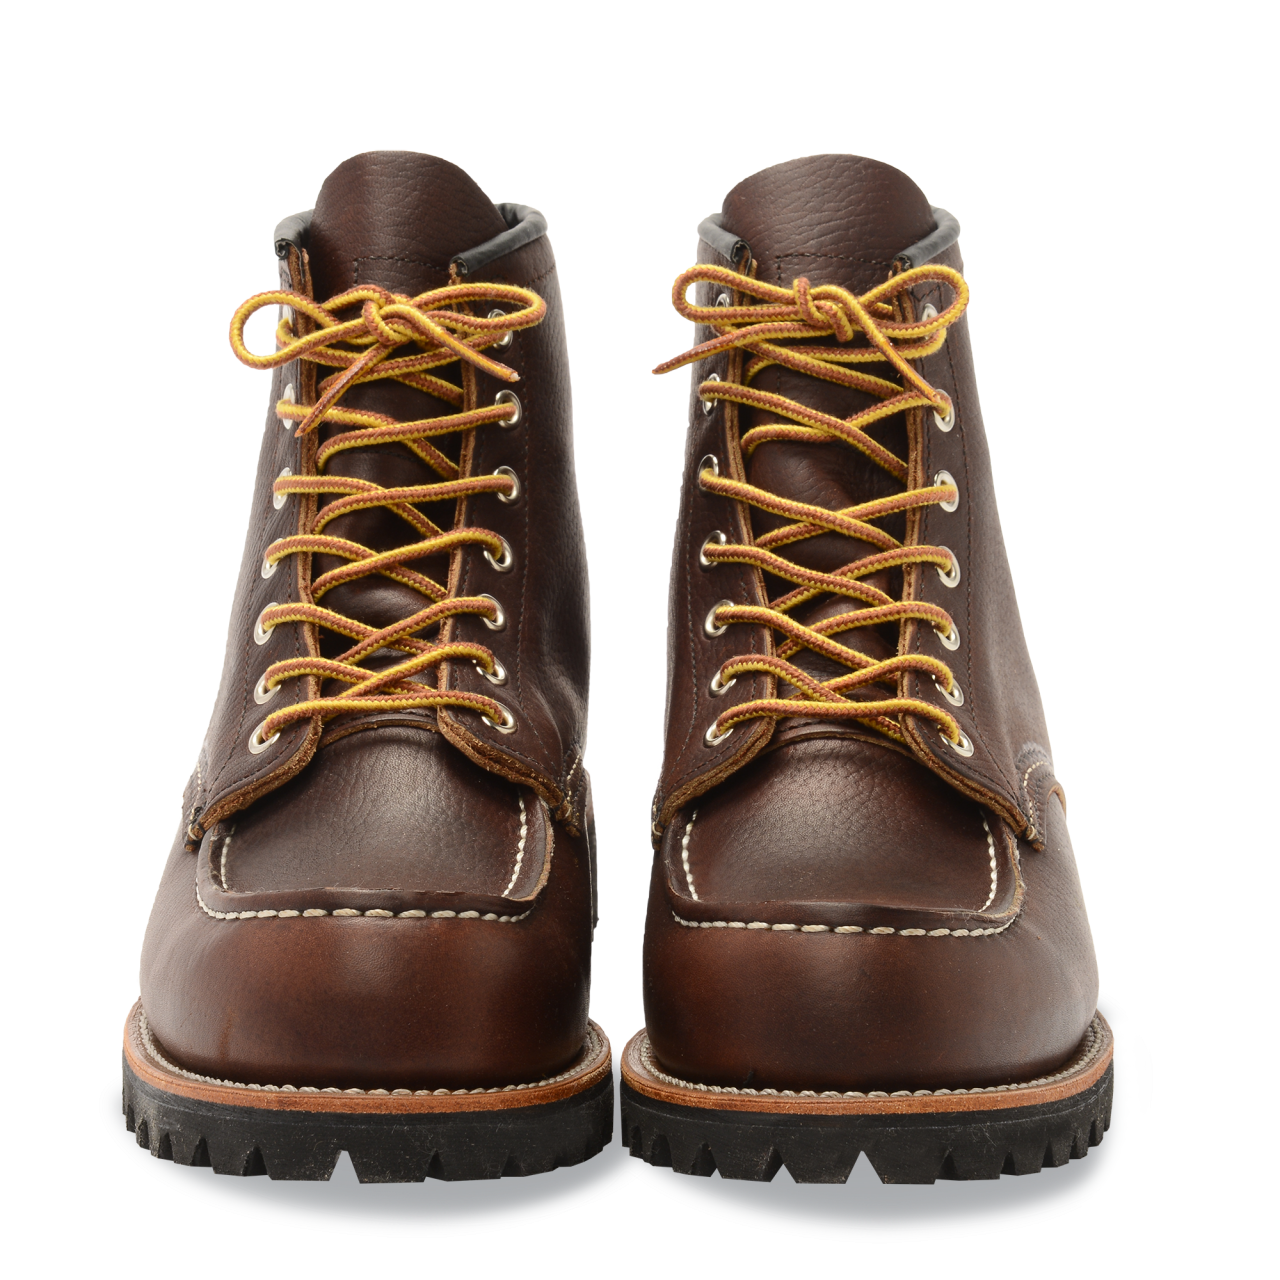 Red Wing 8146 Roughneck Moc Toe